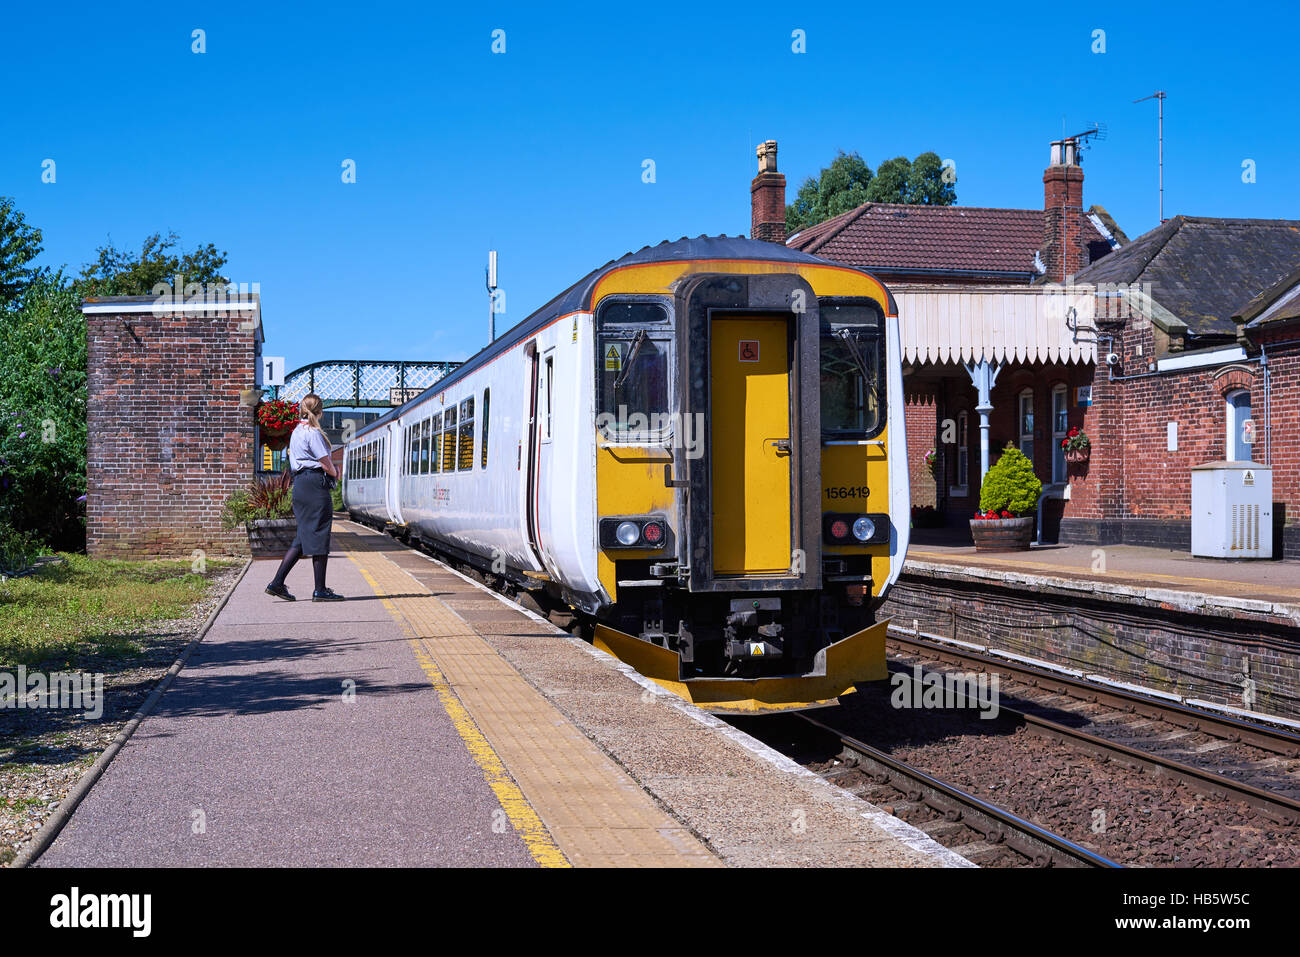 156419 stops at Acle with a Great Yarmouth - Norwich serice on 18th July 2016. Stock Photo